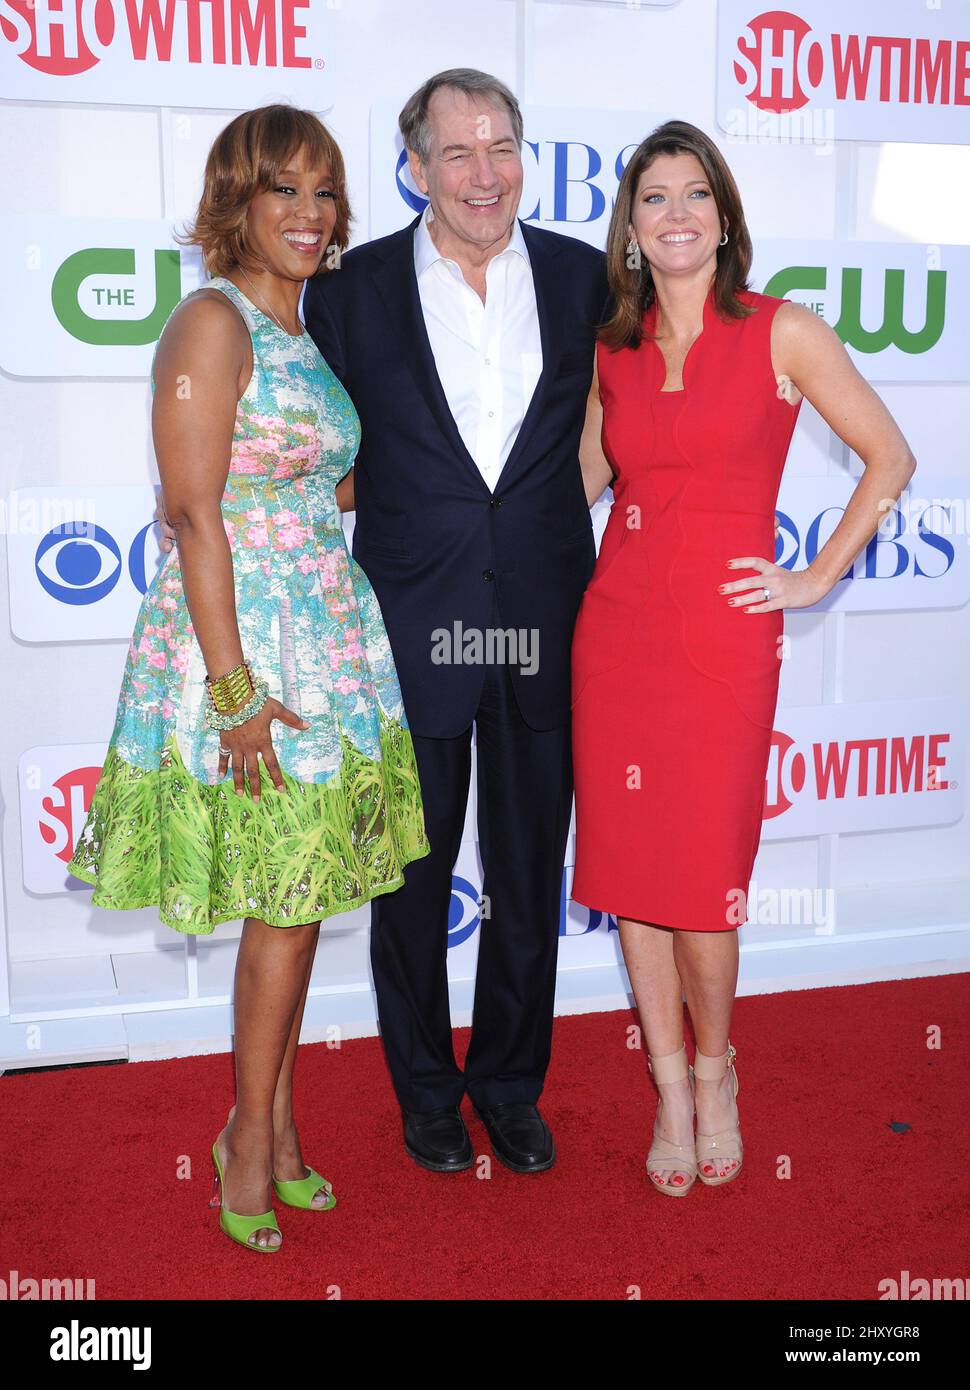 Gayle King, Charlie Rose and Erica Hill attends the CBS, Showtime and The CW Summer 2012 TCA Party held at the Beverly Hilton Hotel, Los Angeles. Stock Photo